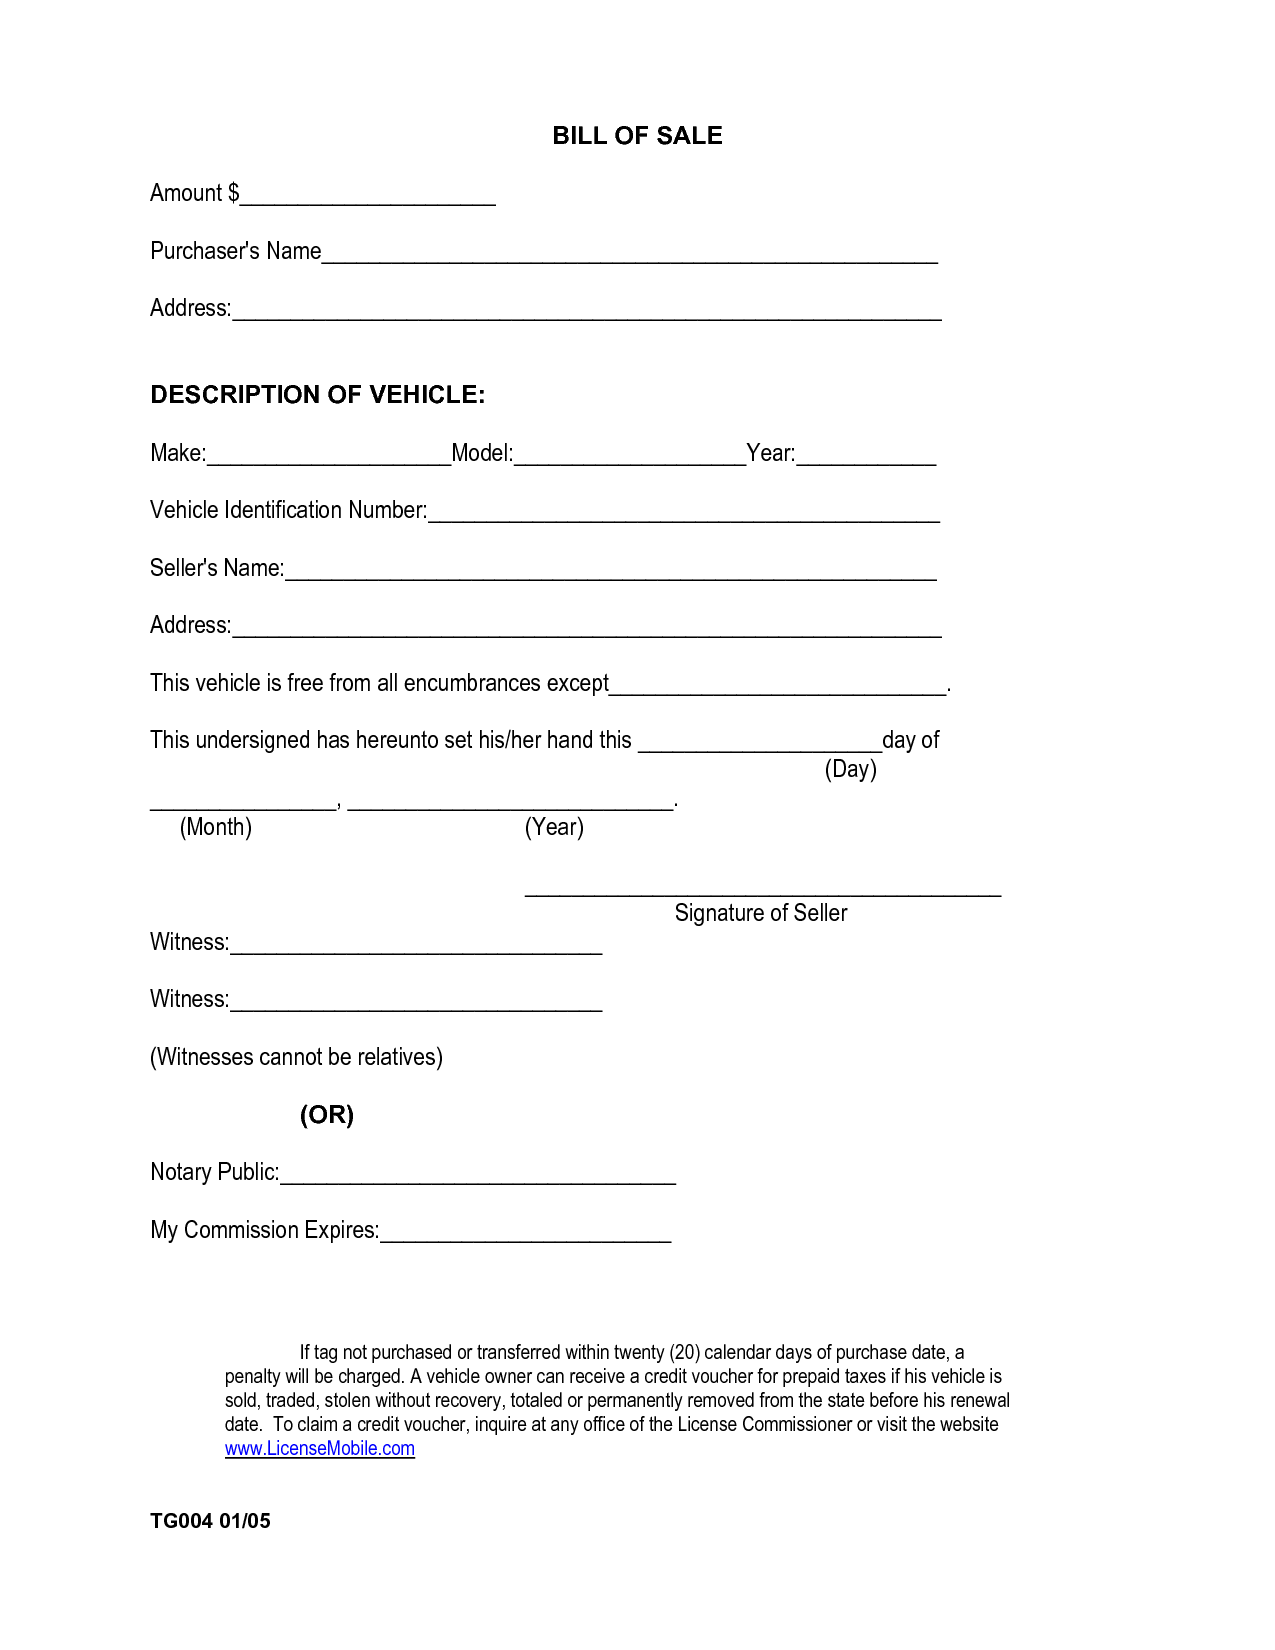 vehicle-bill-of-sale-free-printable-documents